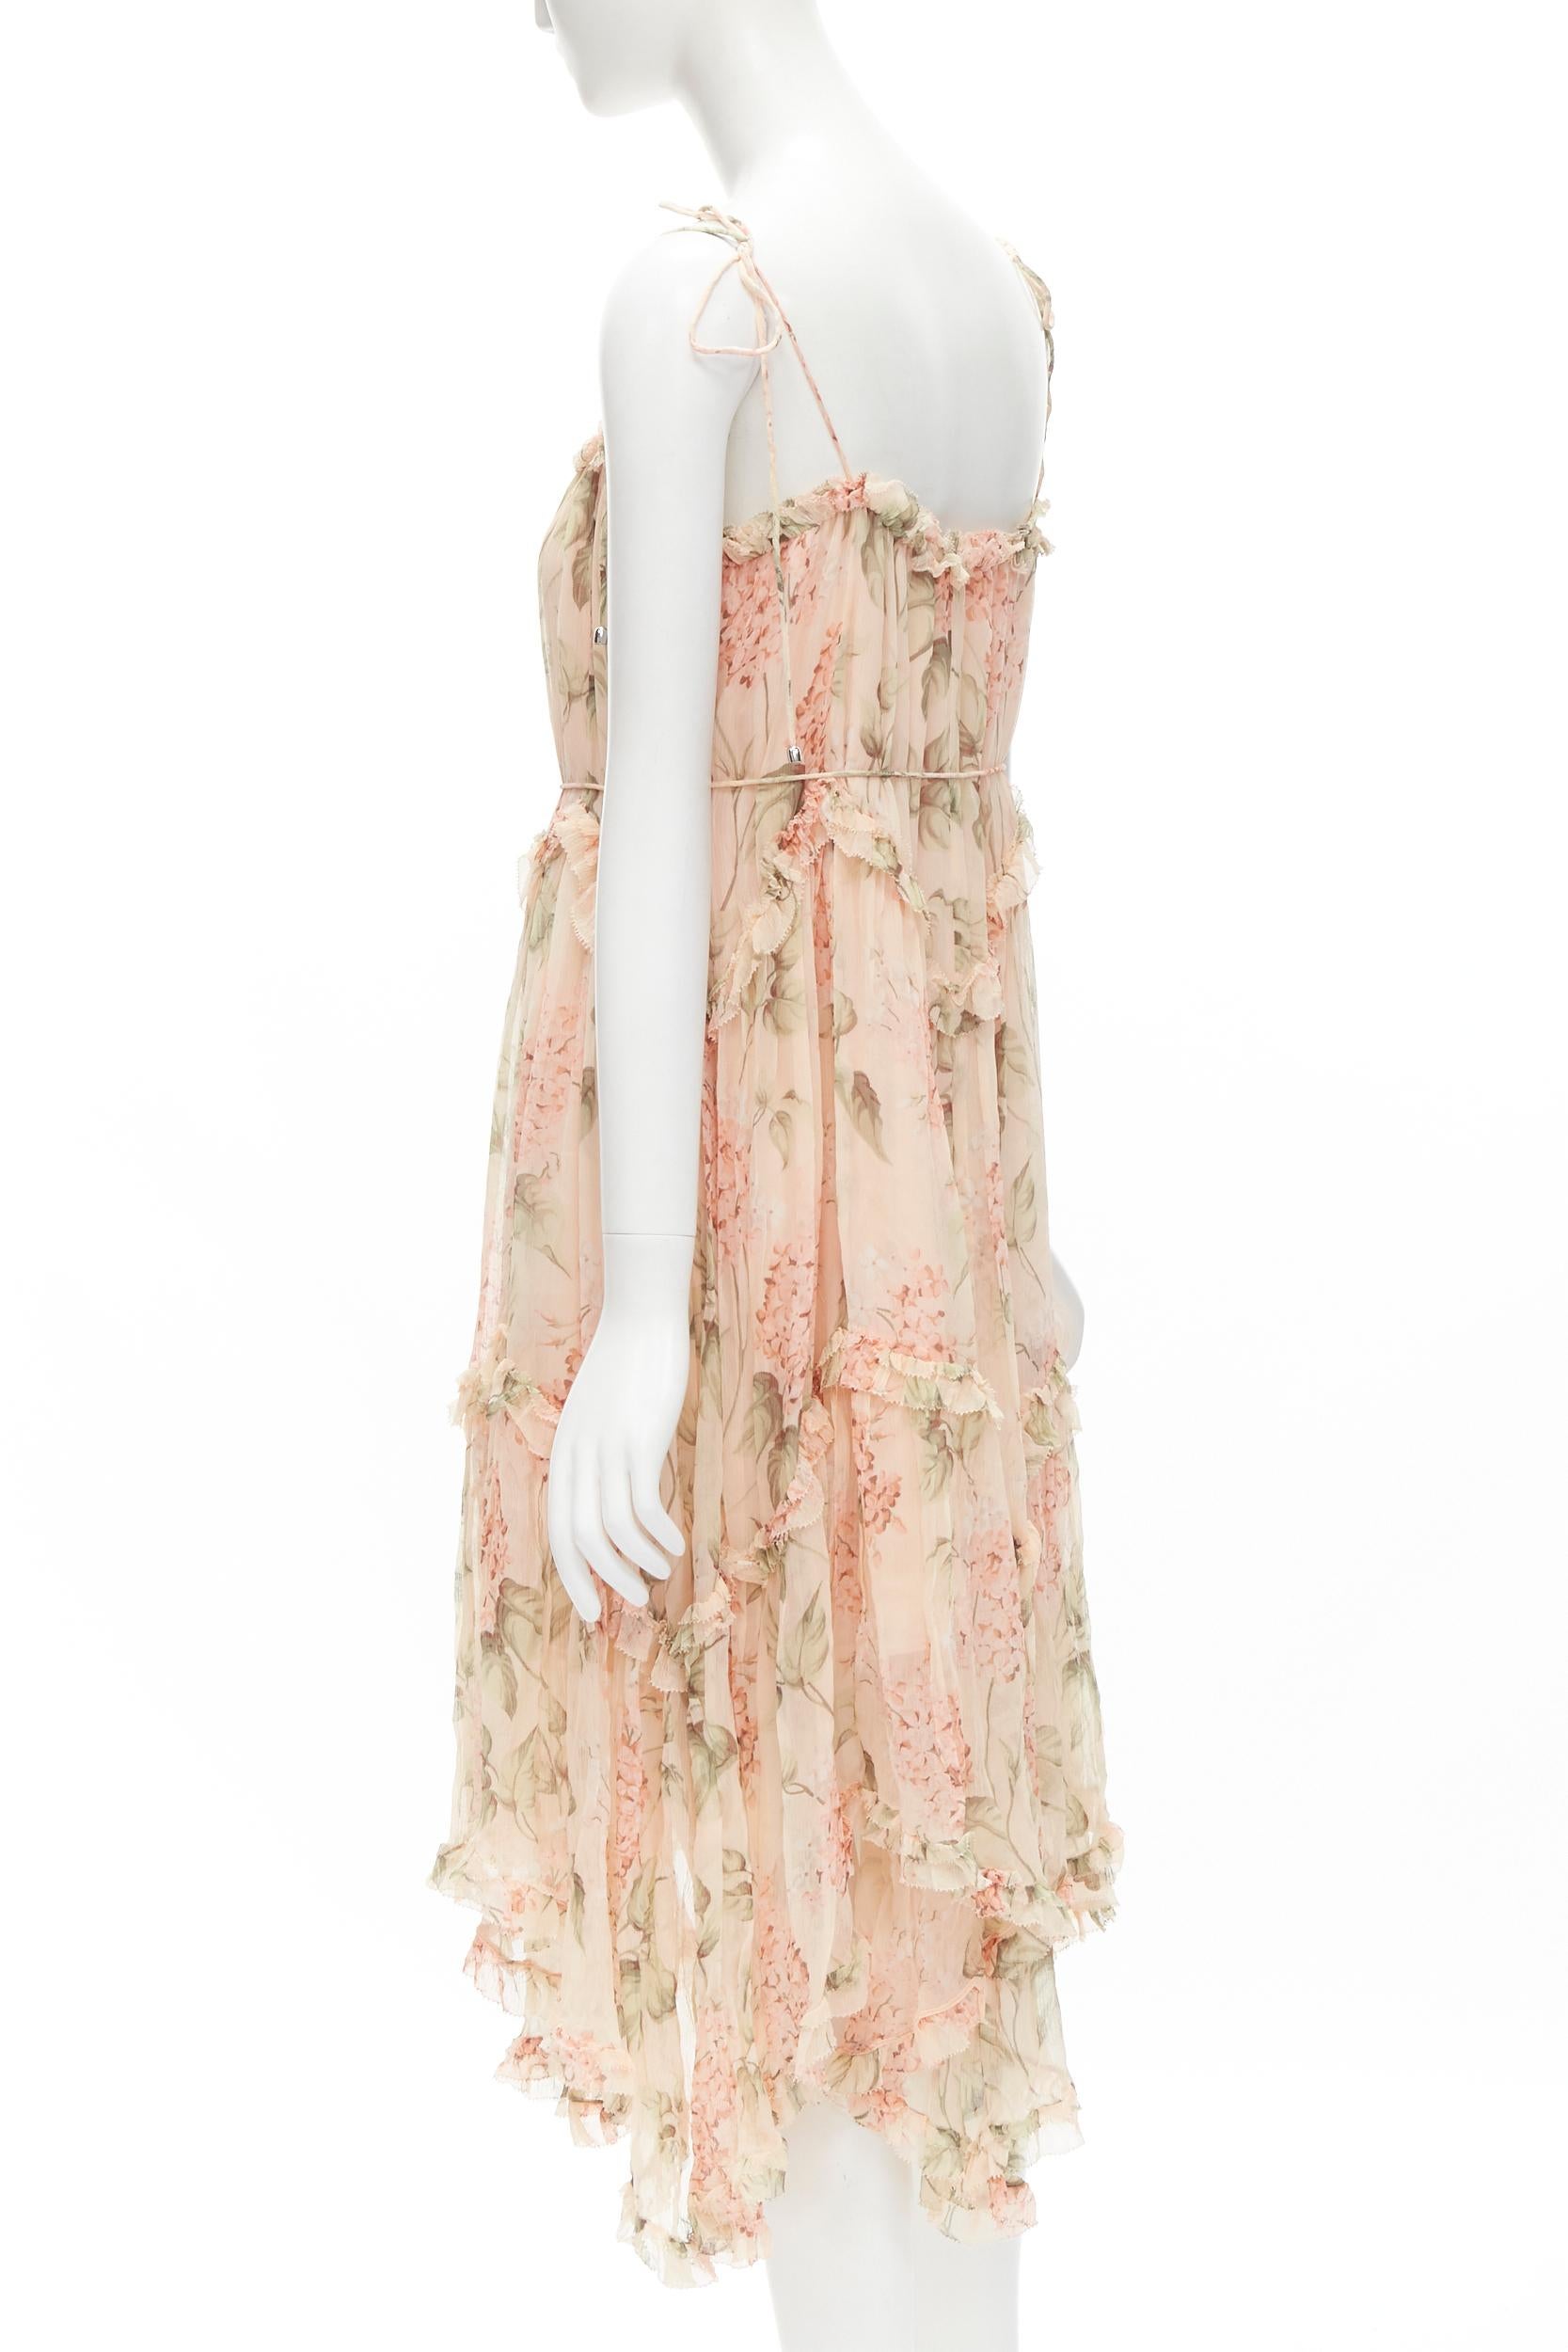 ZIMMERMANN 100% silk blush pink floral print ruffle trim summer dress Sz.1 S In Excellent Condition For Sale In Hong Kong, NT